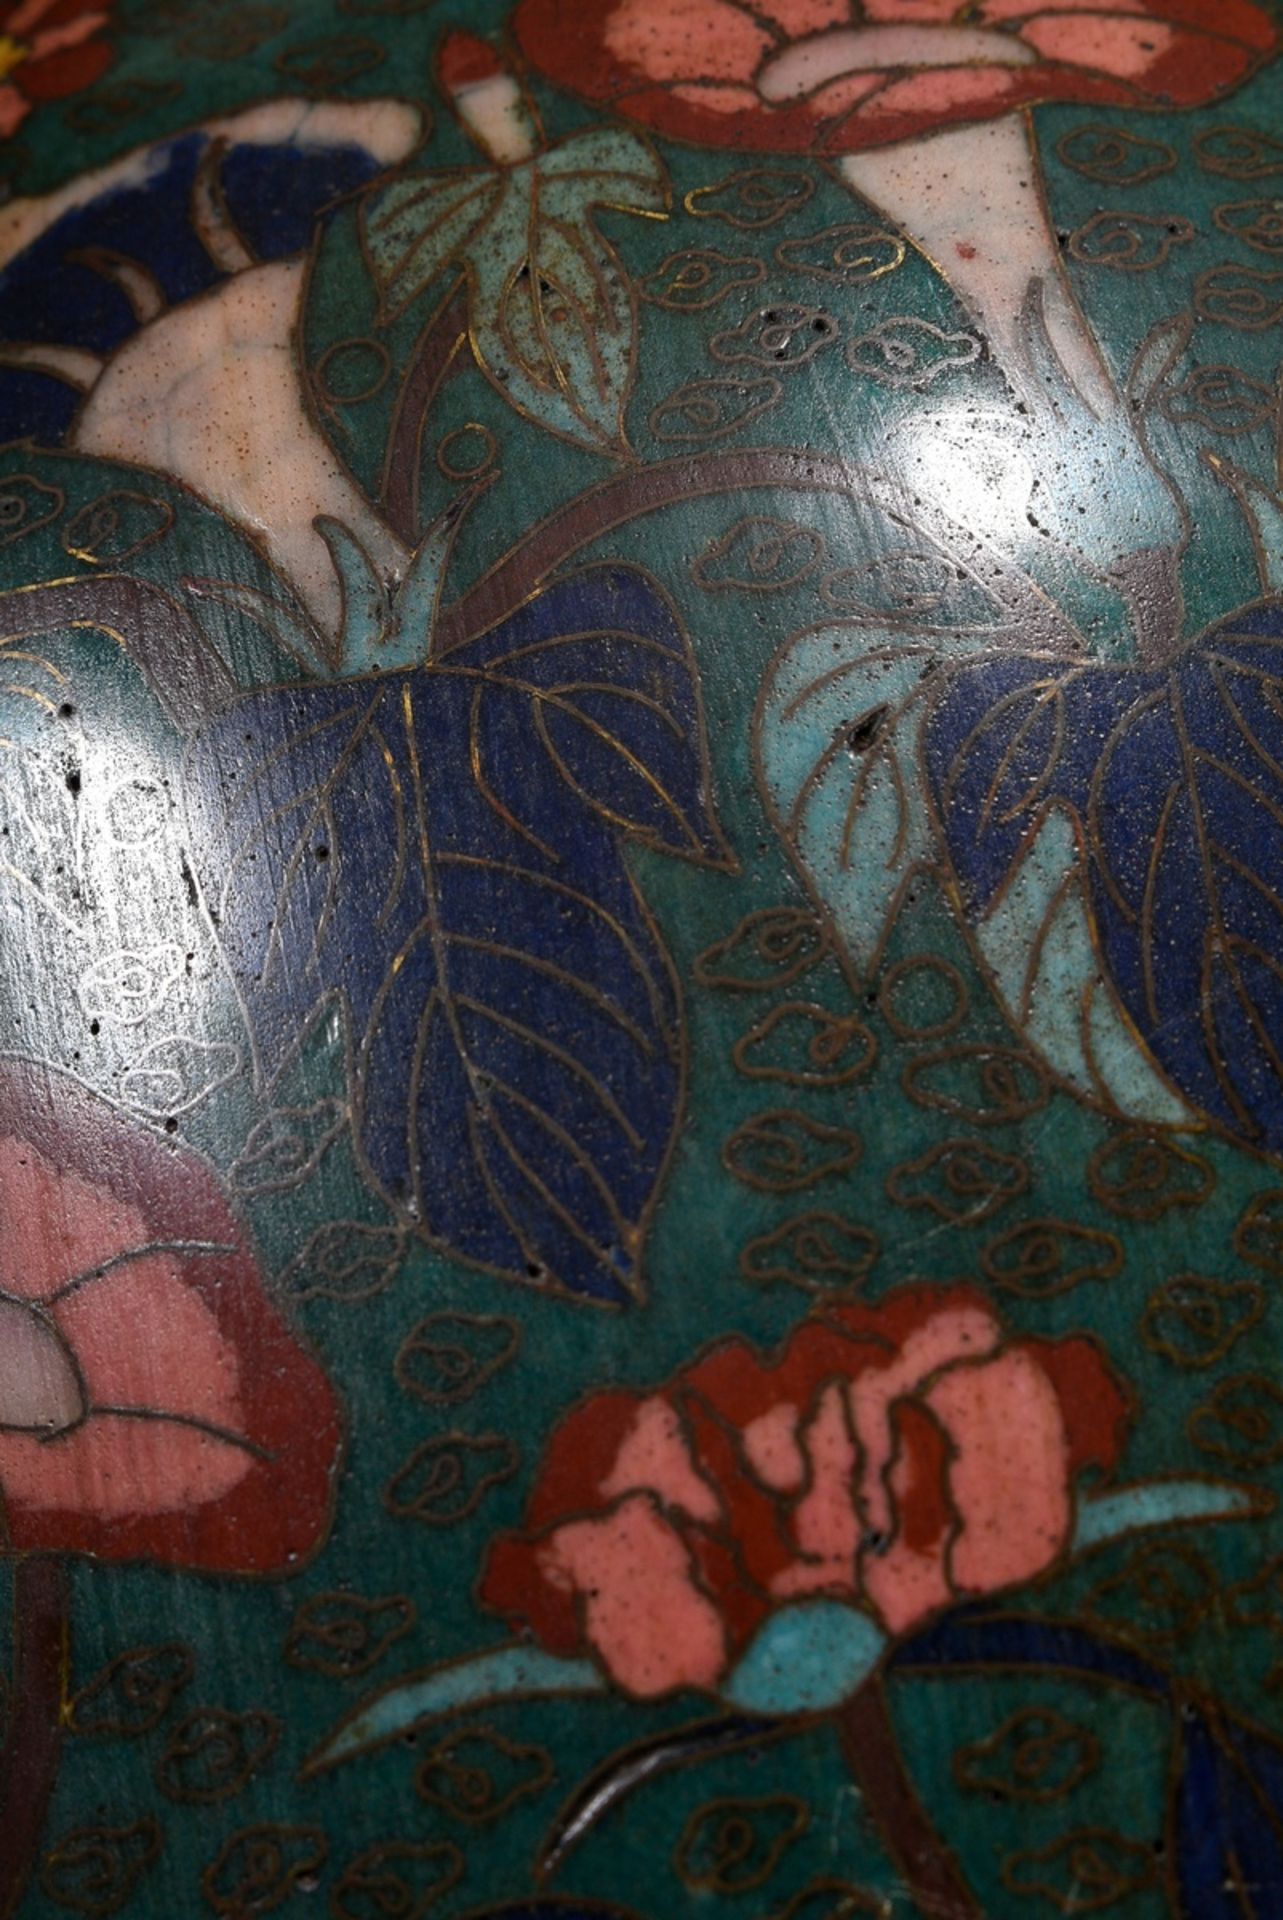 Large cloisonné shoulder vase with floral and geometric decoration in dark shades on a dark green b - Image 7 of 7